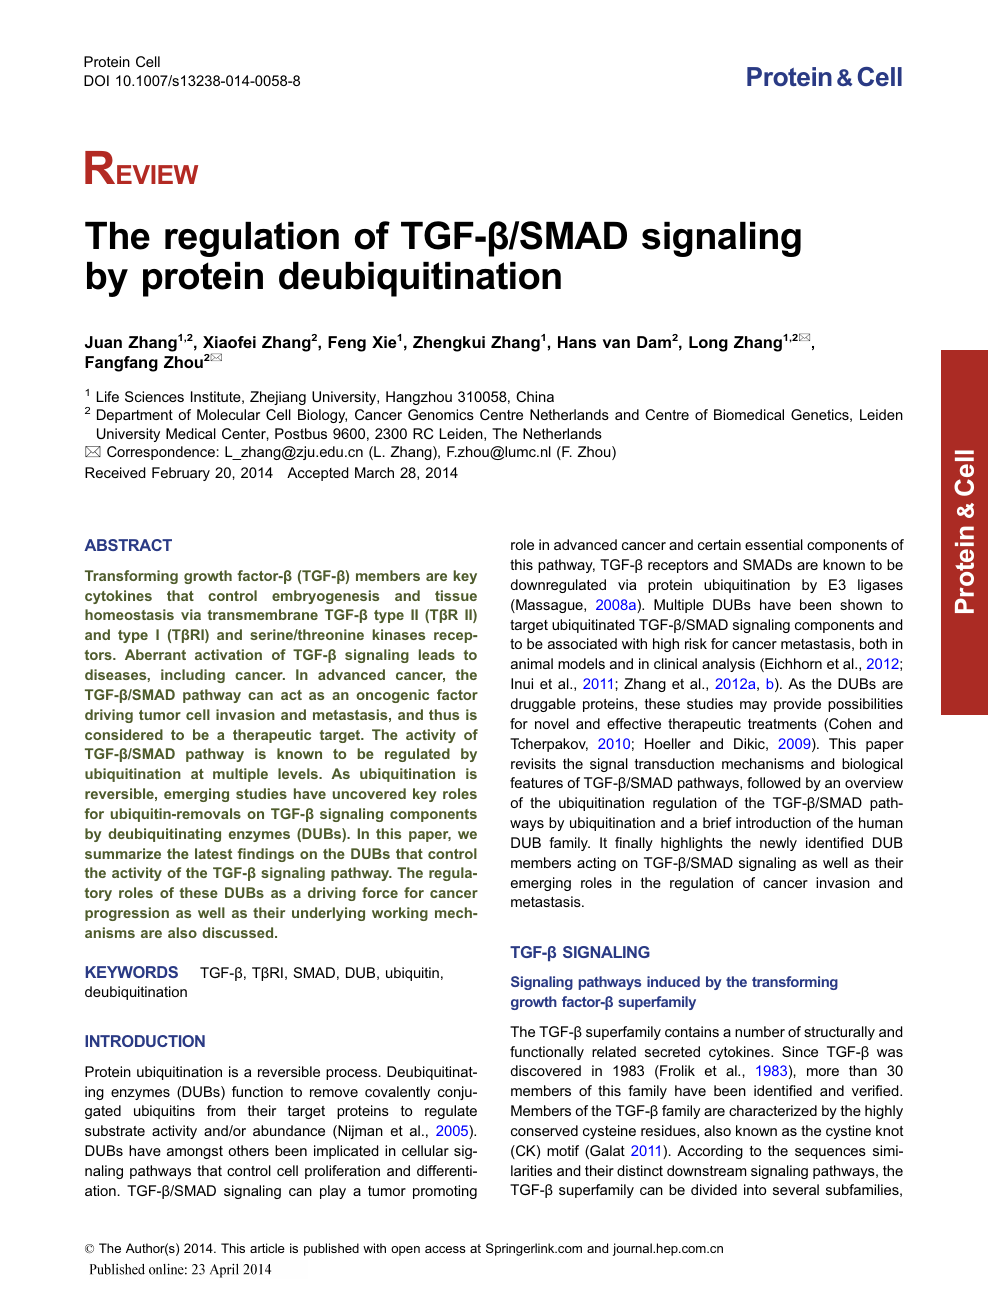 The Regulation Of Tgf B Smad Signaling By Protein Deubiquitination Topic Of Research Paper In Biological Sciences Download Scholarly Article Pdf And Read For Free On Cyberleninka Open Science Hub